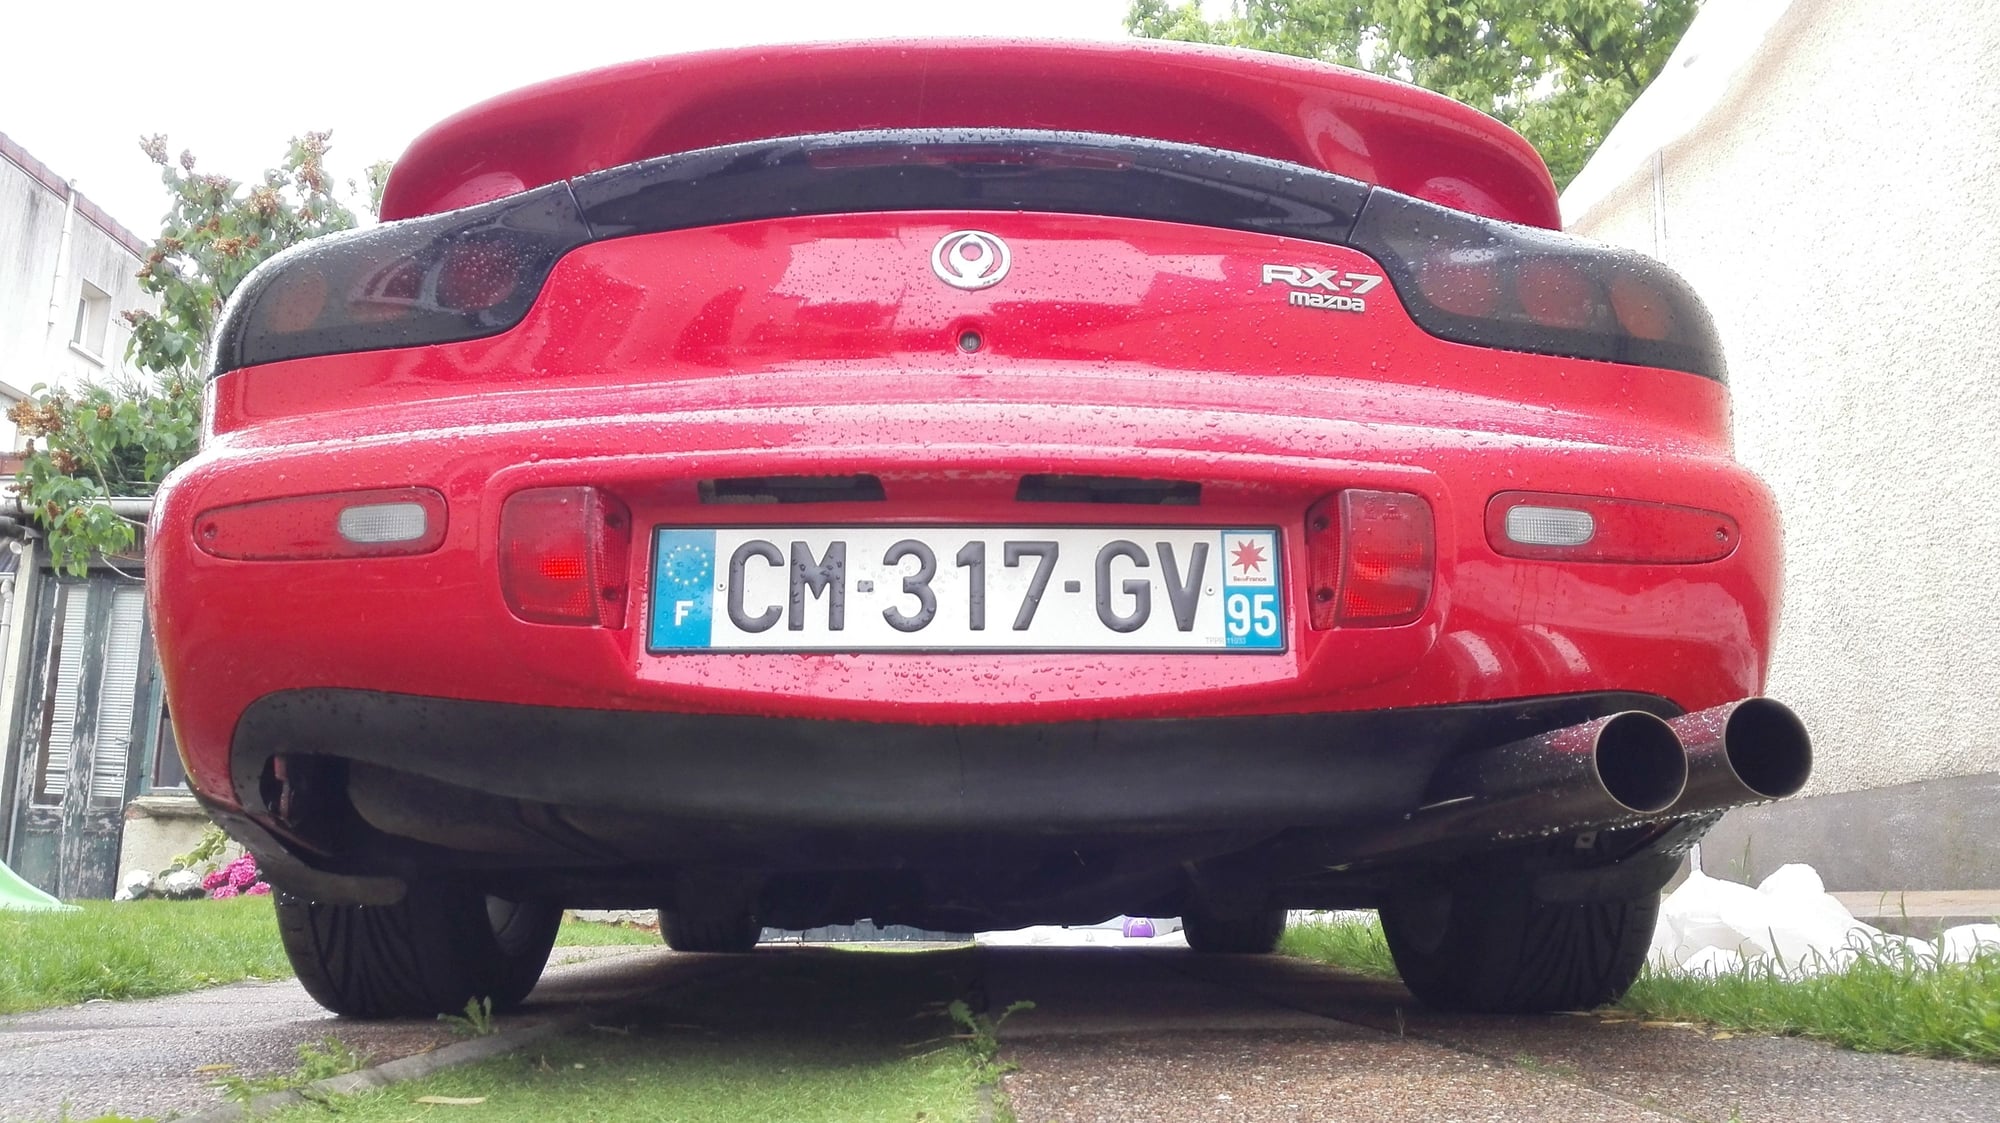 Engine - Exhaust - FD3S blast pipes to bolt to your RB catback front end - Used - 1993 to 2002 Mazda RX-7 - Saint Maur Des Fossés, France